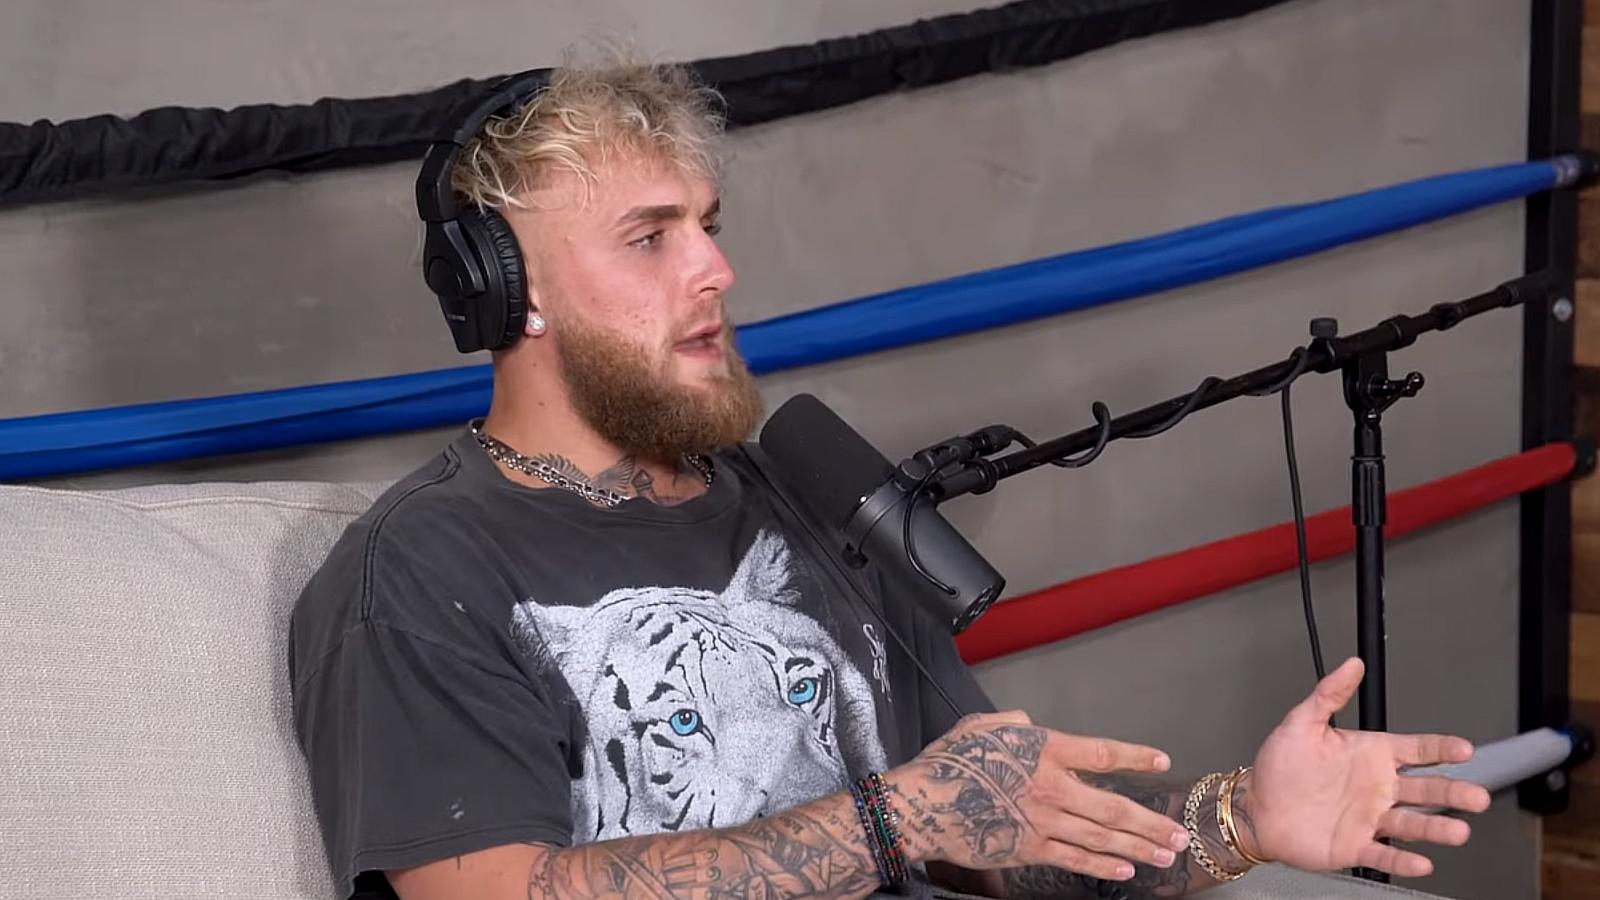 Jake Paul in the latest episode of IMPAULSIVE, talking to his brother and the host